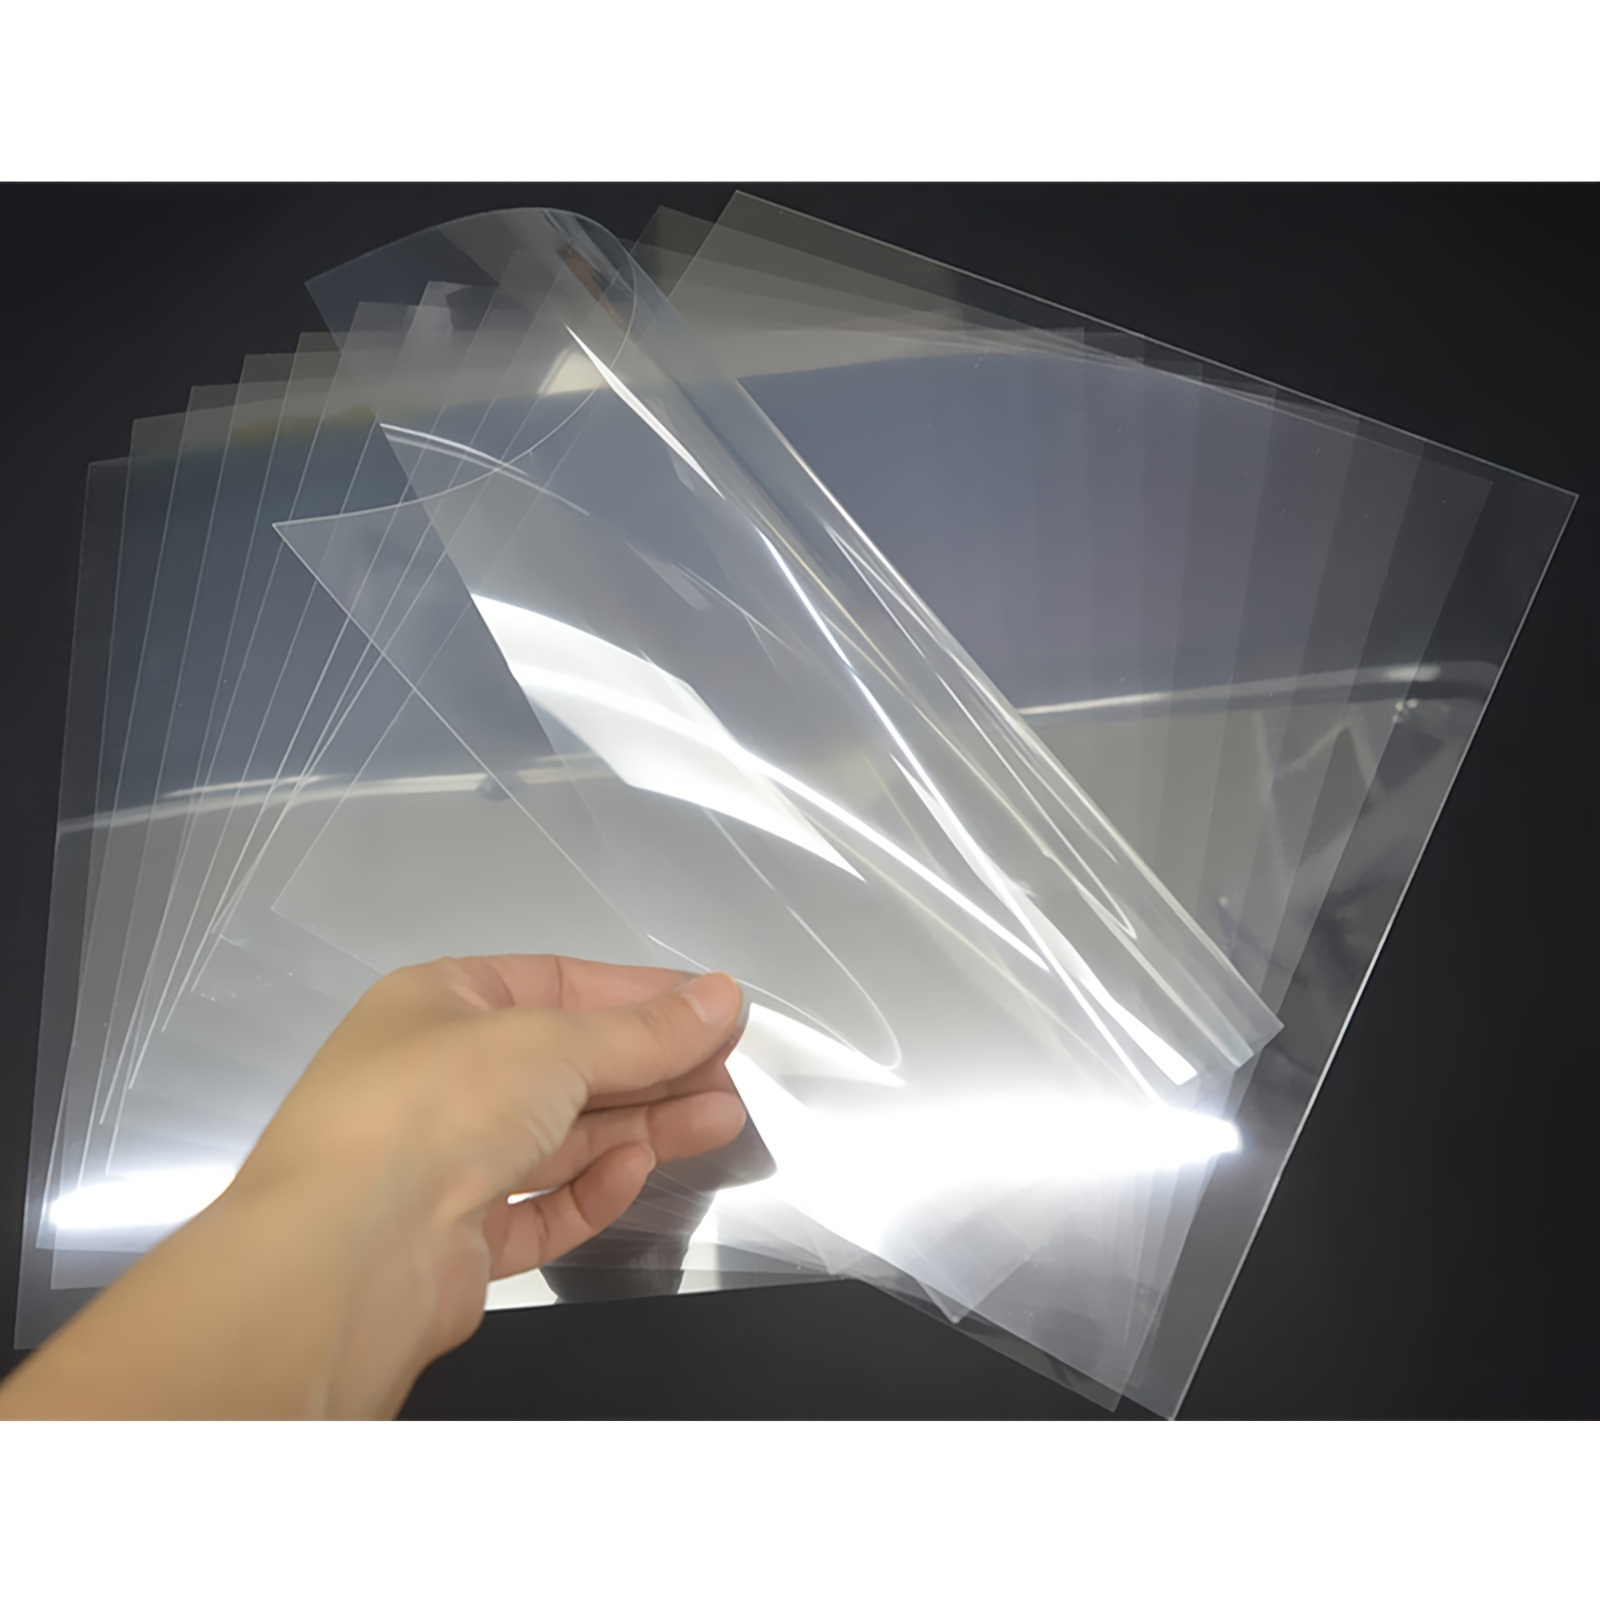 50 Sheets Inkjet Transparency Paper,100% Clear Inkjet Transparency Film for  Inkjet Printers,Overhead Projector Transparencies and Screen Prints